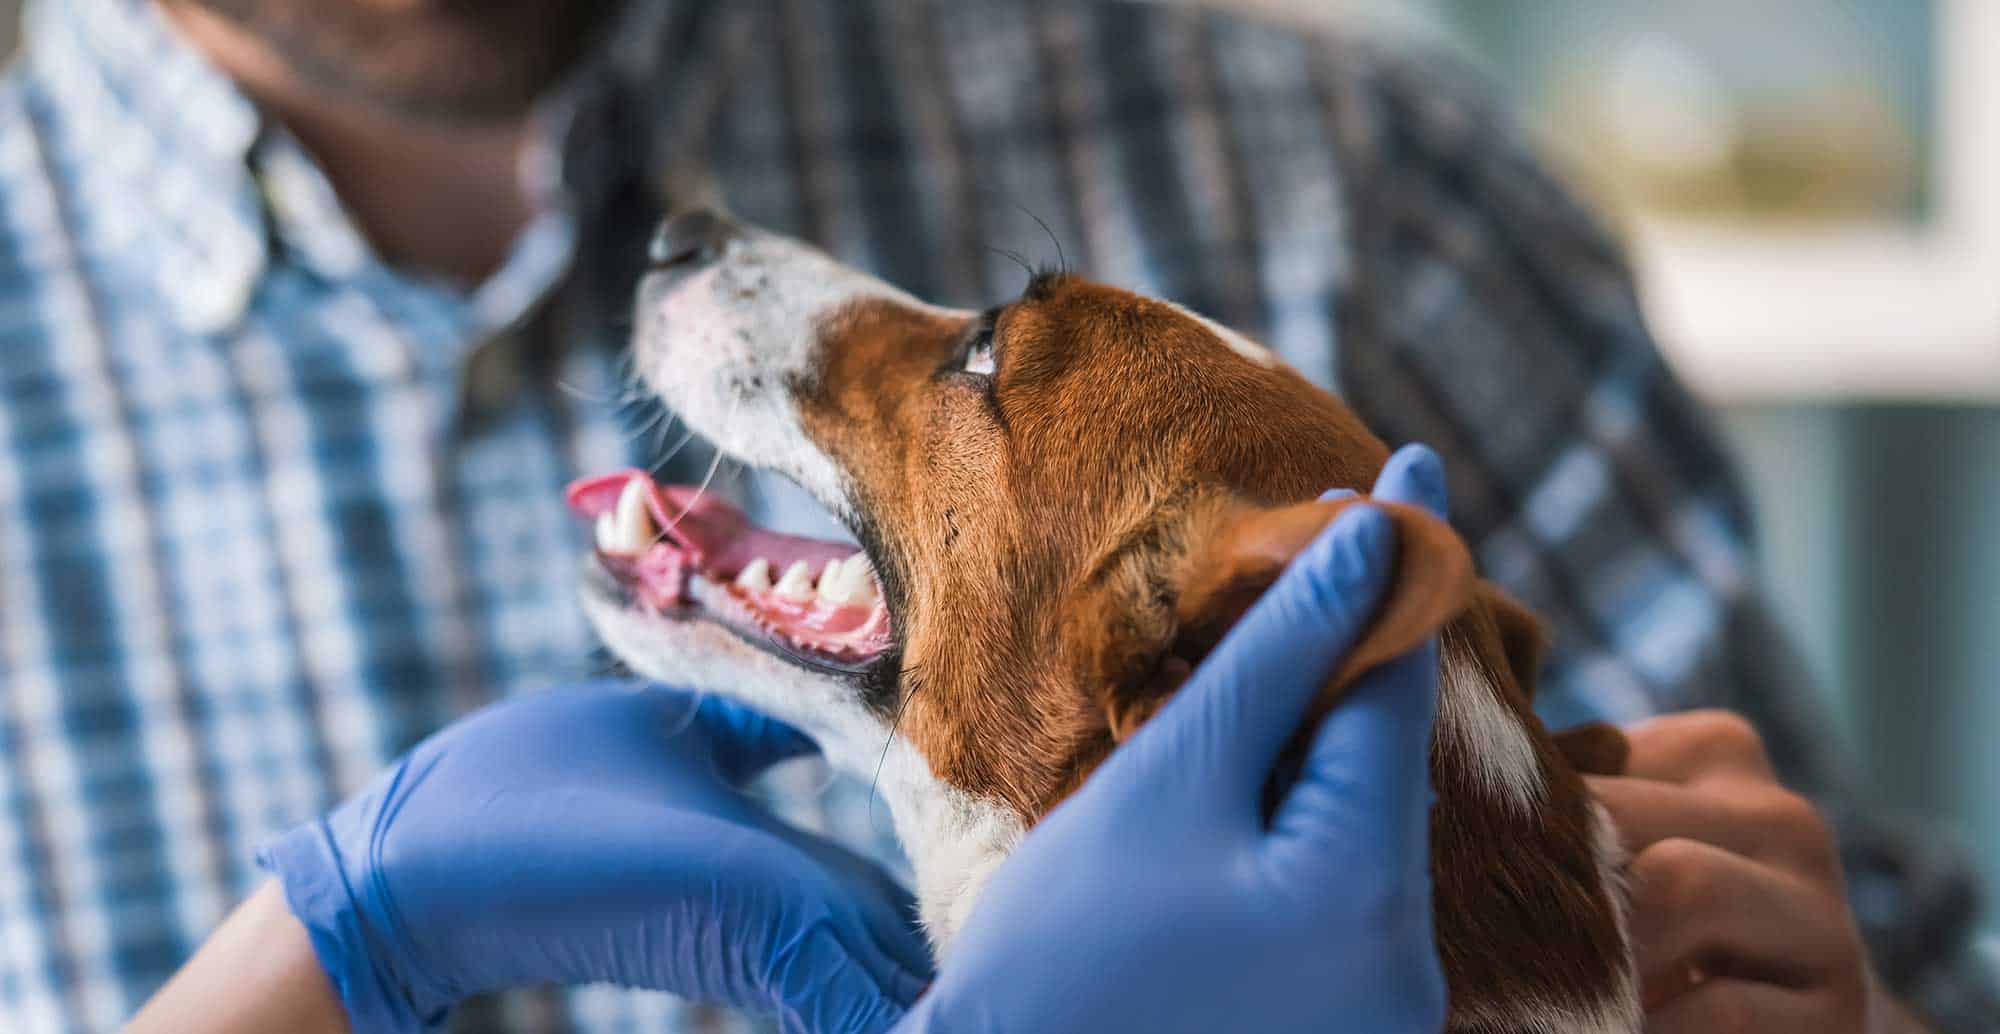 A dog having its ears checked